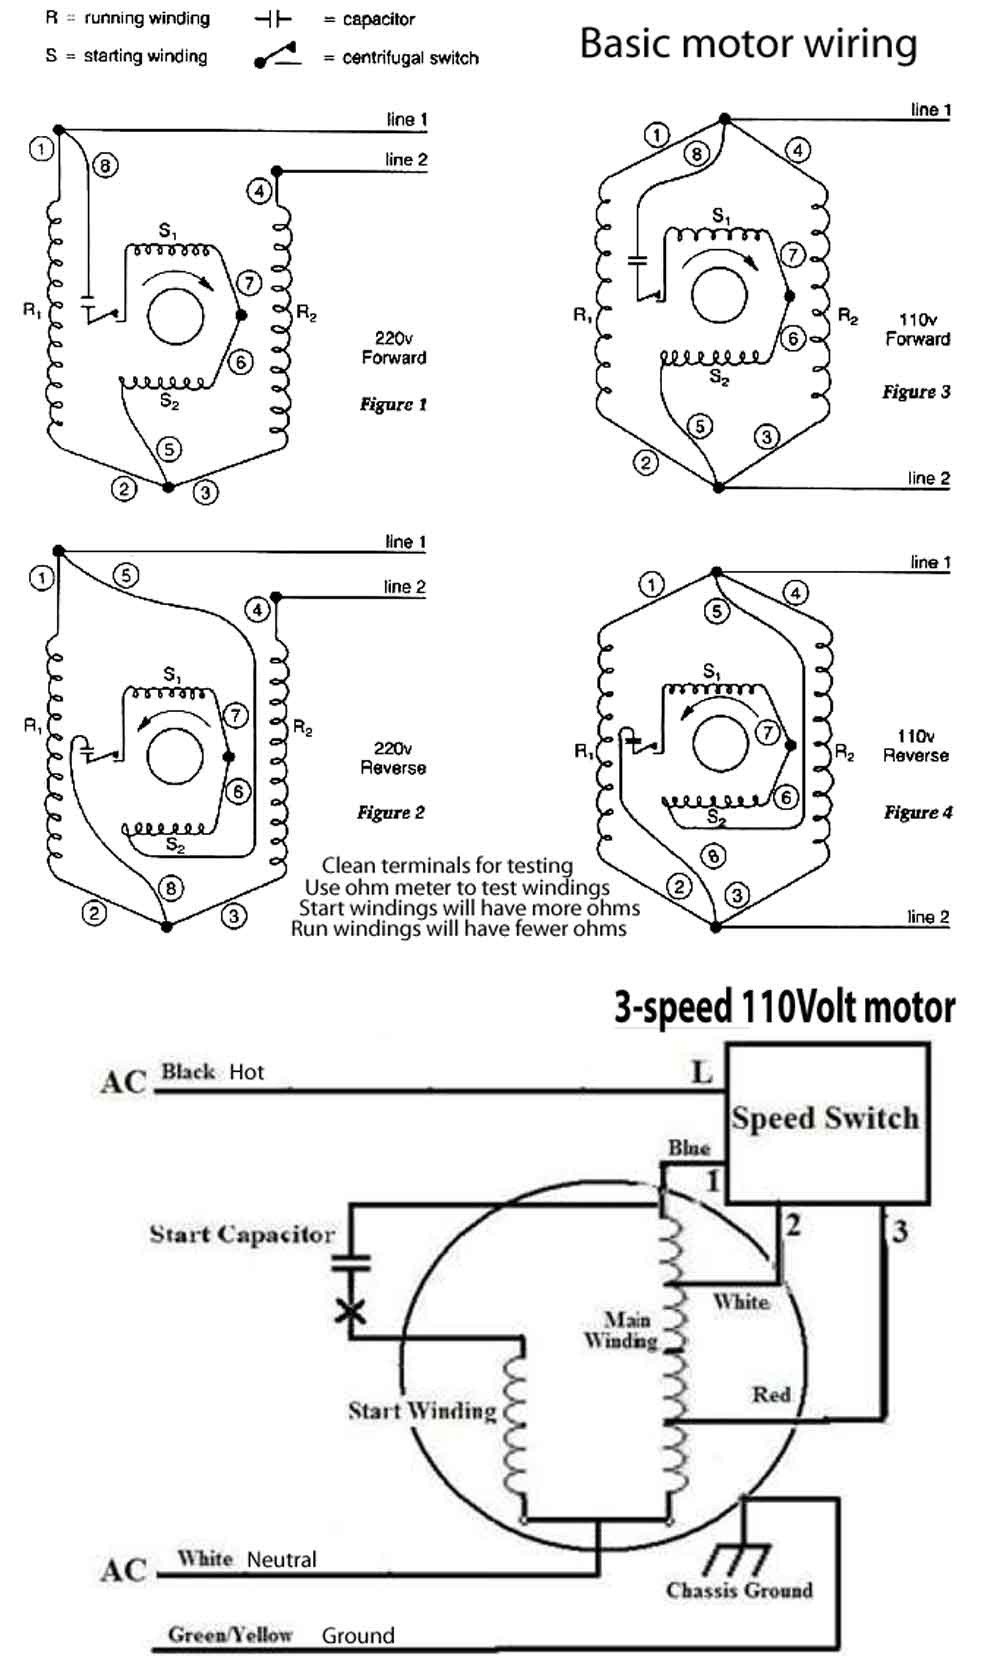 Whole House Fan Wiring Diagram Motor How To Wire Speed Switch Timer